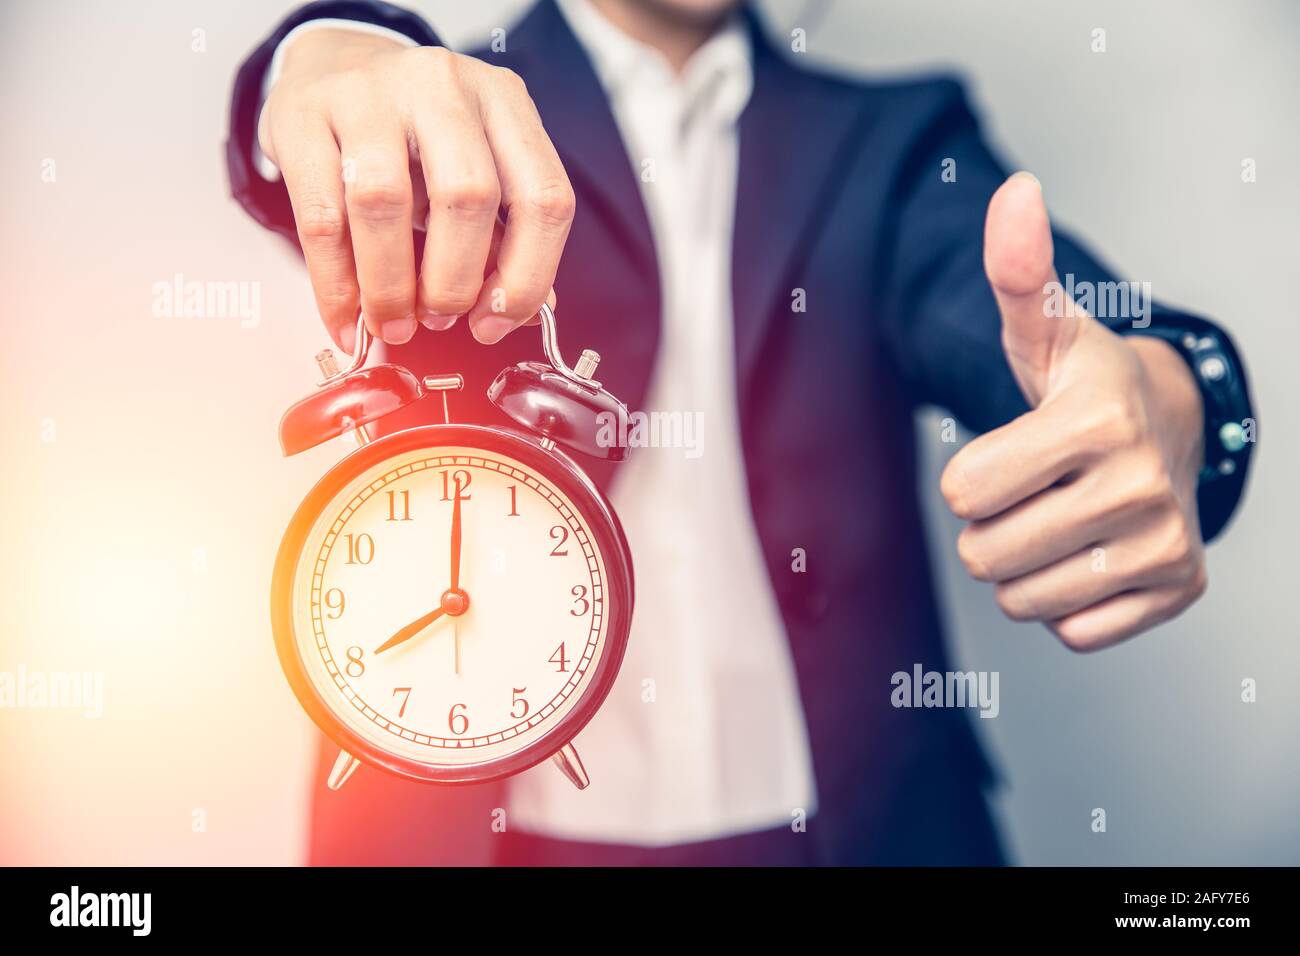 Business person hand showing thumbs up with a clock for good times or right time work on time concept. Stock Photo